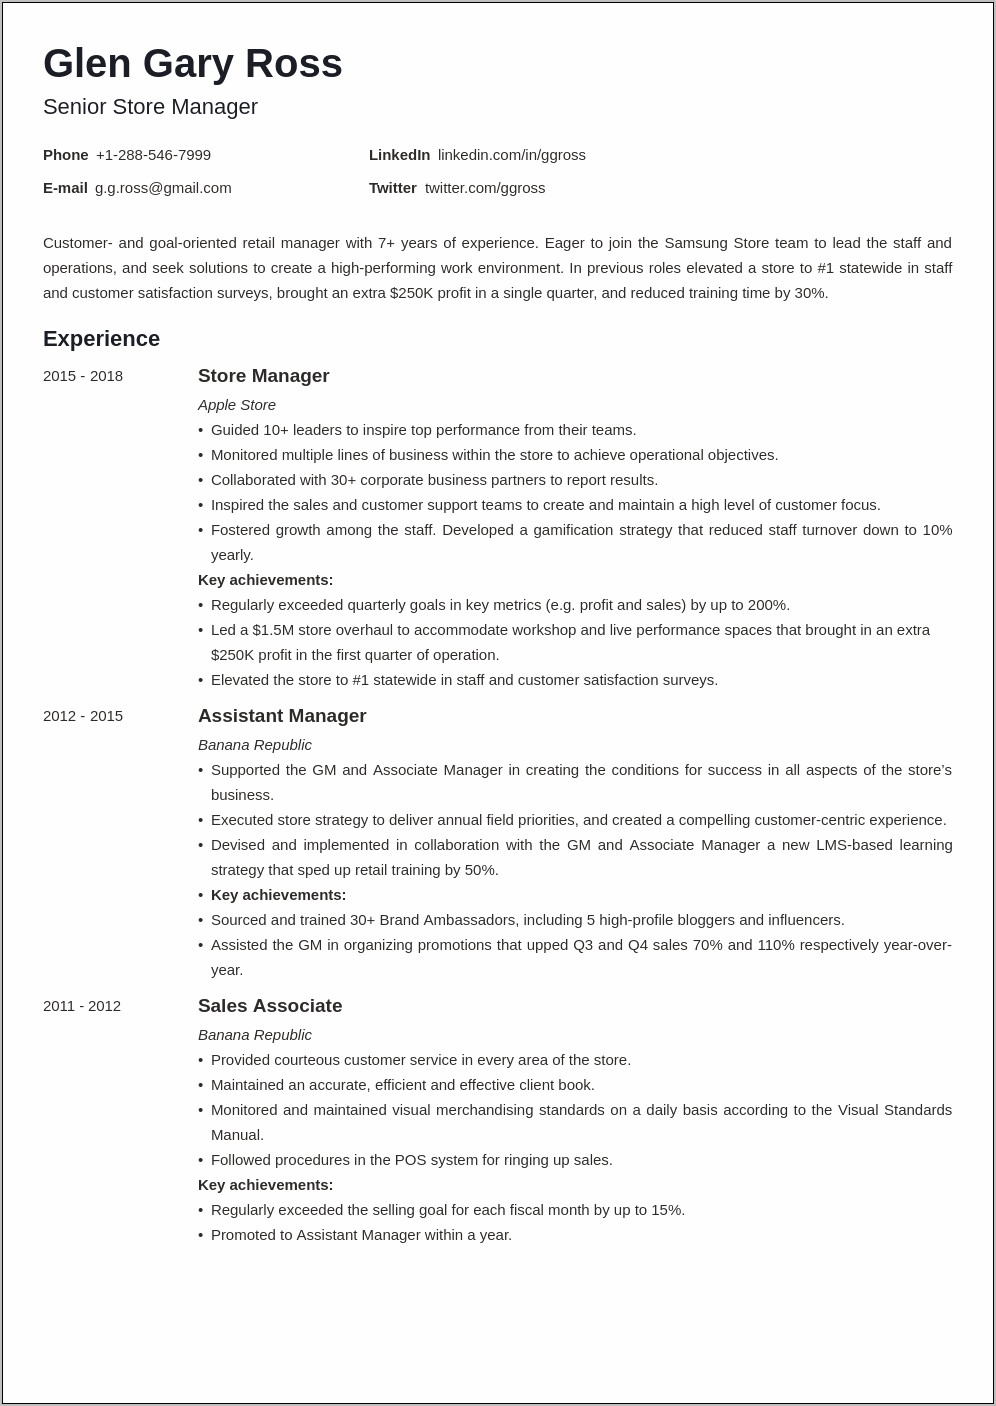 Sample Resume For High End Retail Position